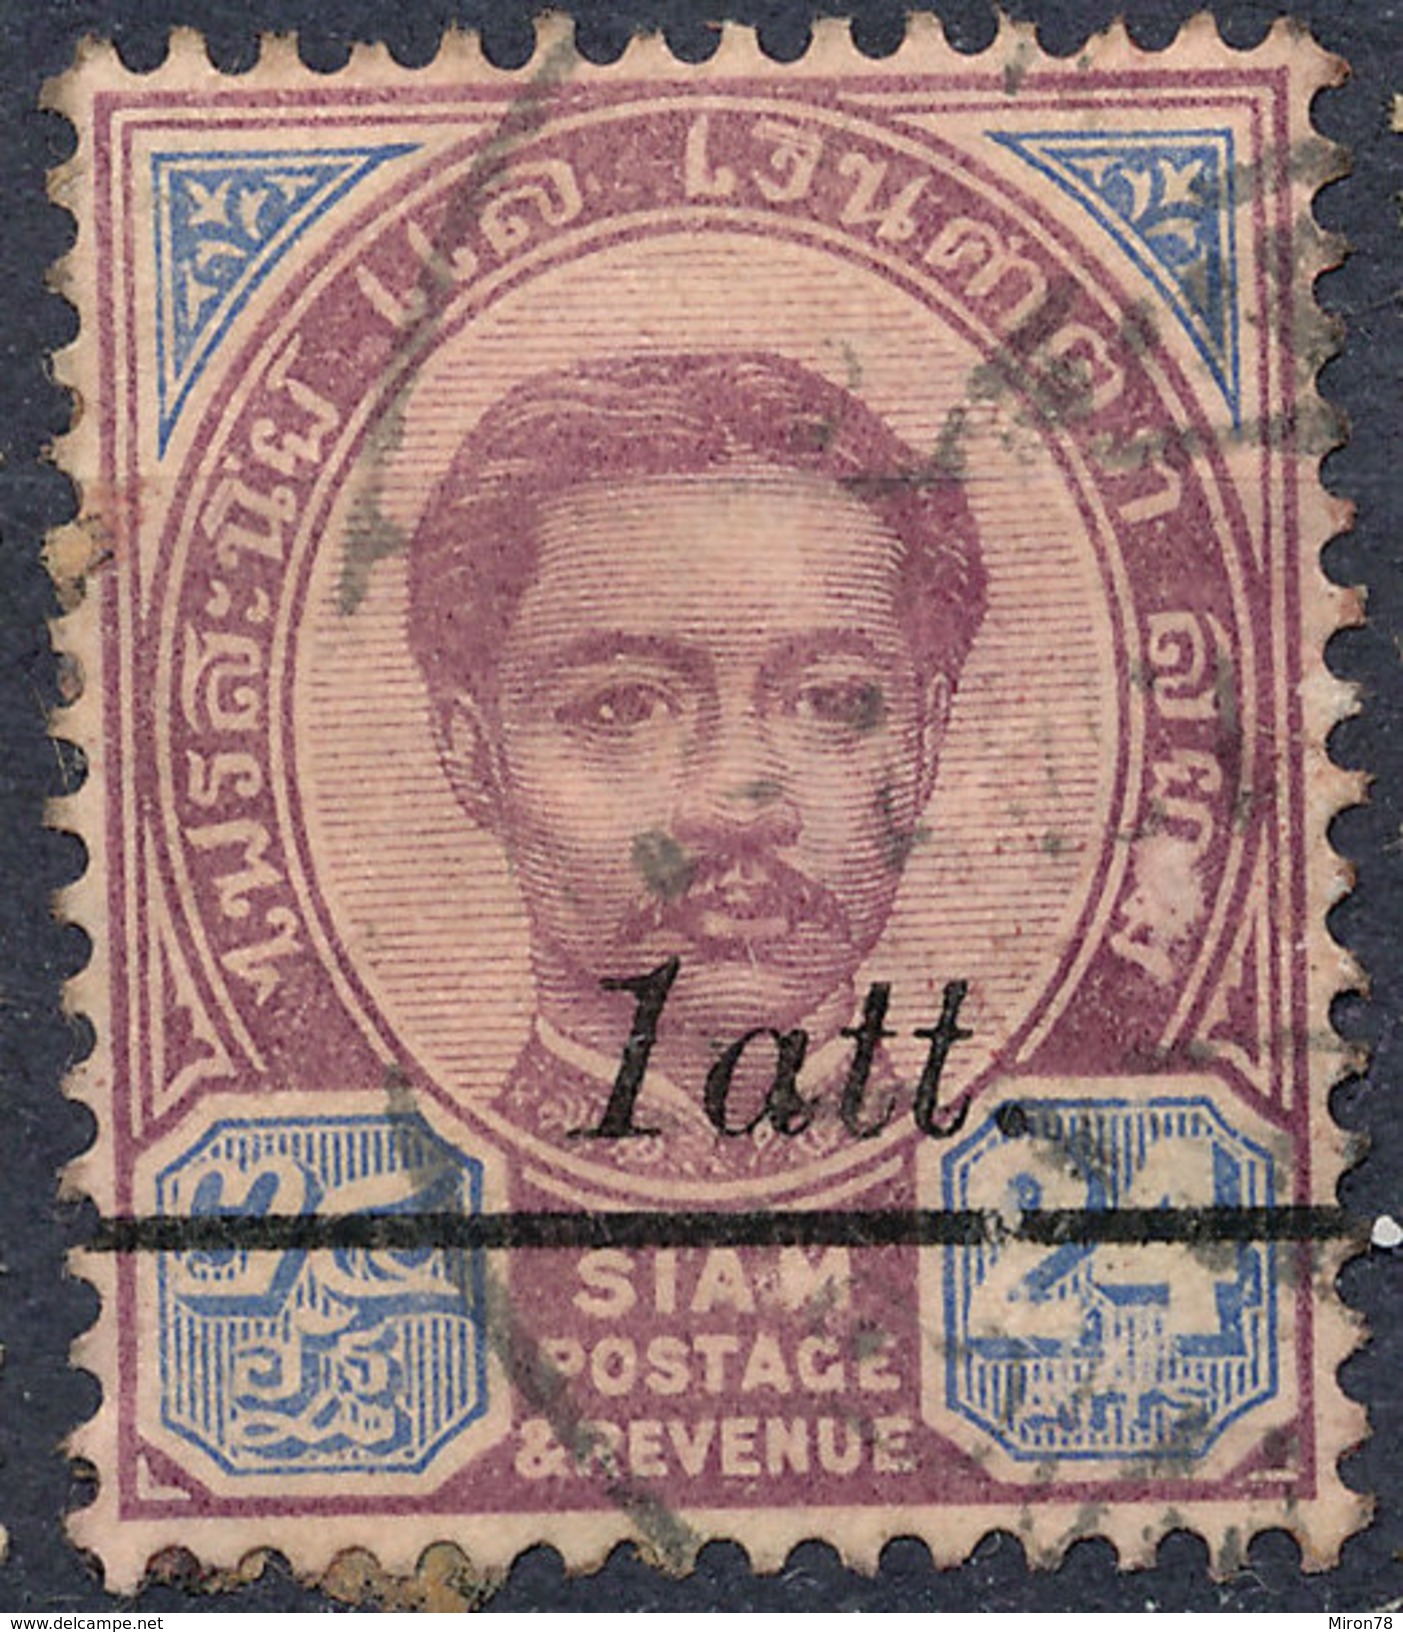 Stamp  THAILAND,SIAM 1907 Scott#109 Lot#84 - Collections (with Albums)